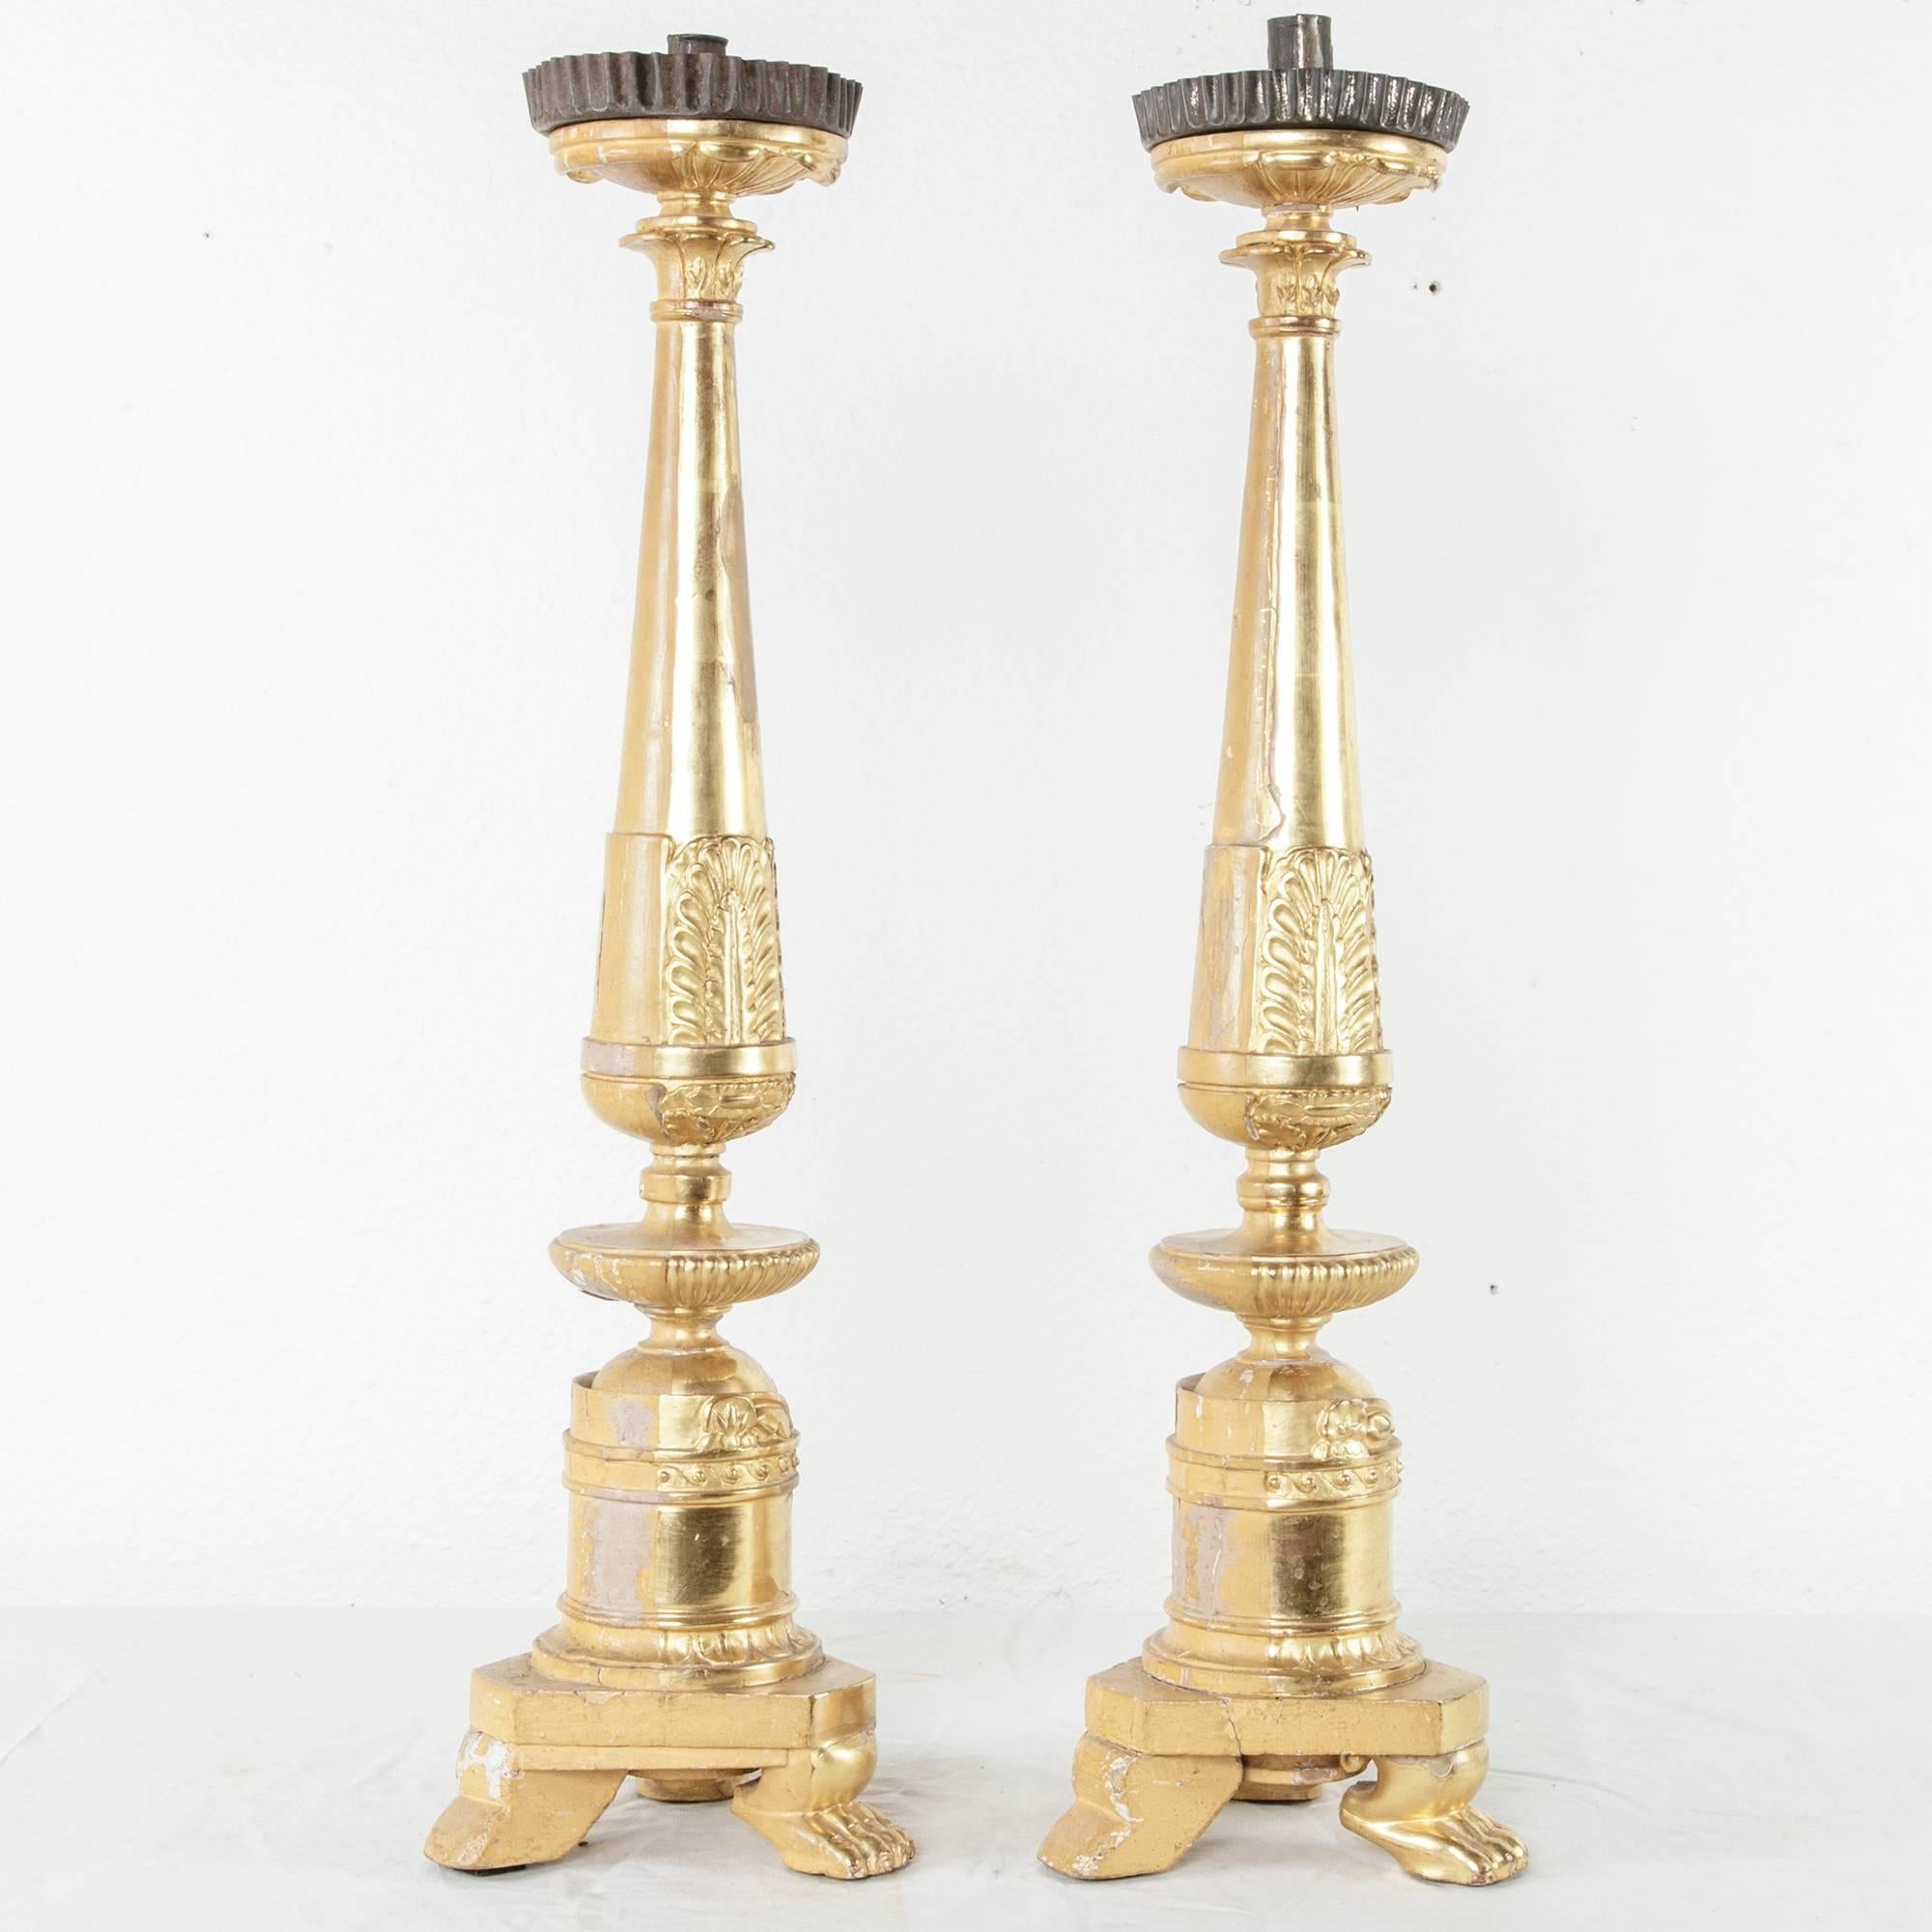 Early 19th Century French Empire Period Giltwood Candlesticks or Prickets For Sale 2